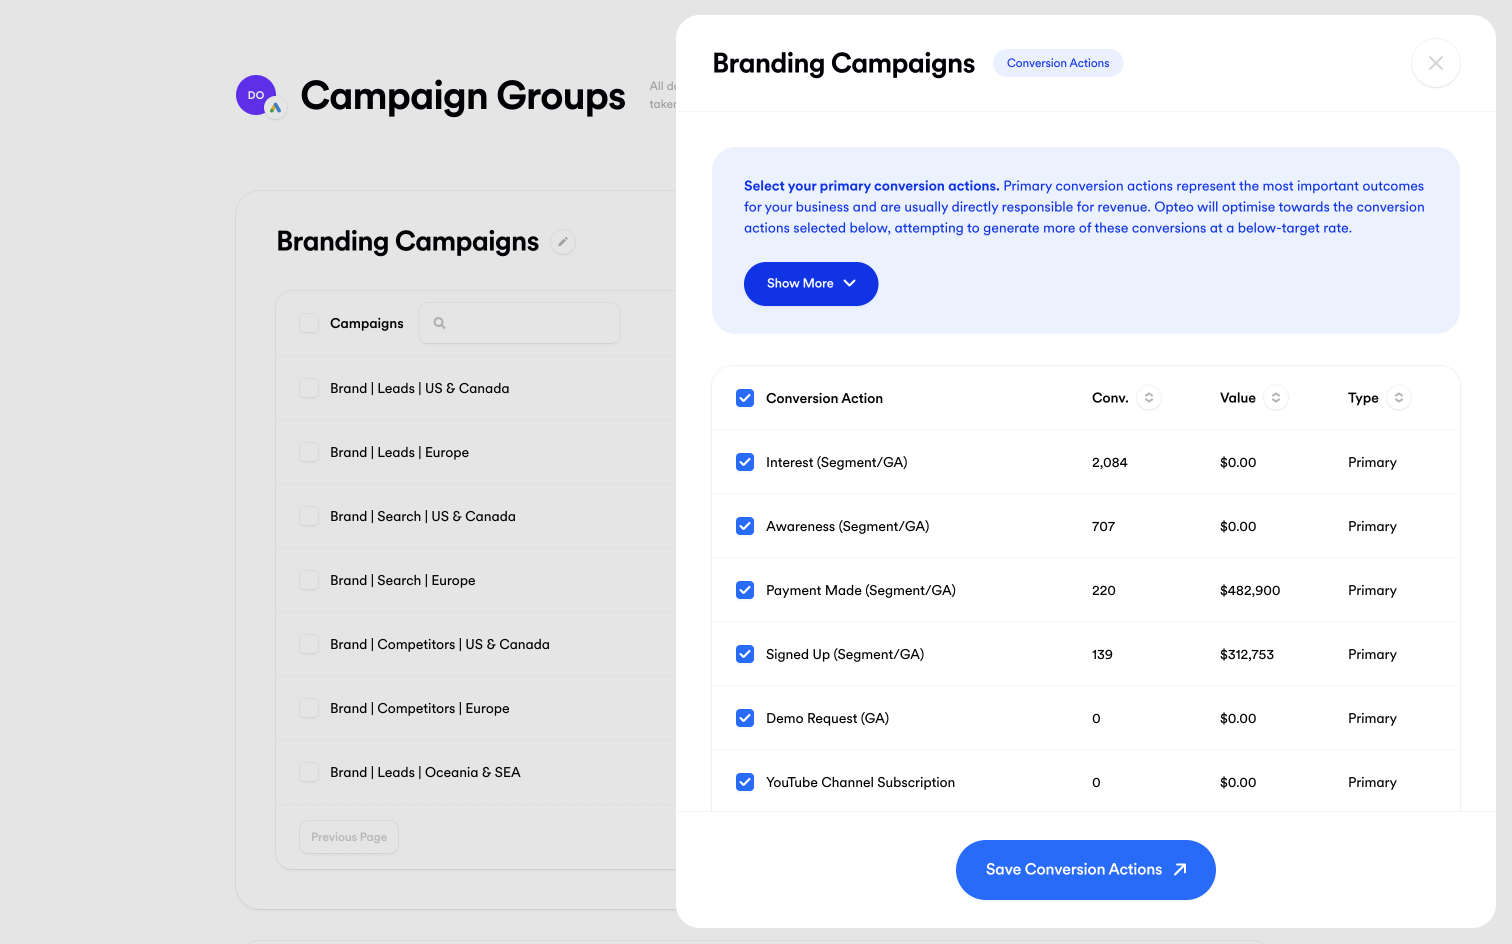 Screenshot of "Conversion Actions" panel in Campaign Groups